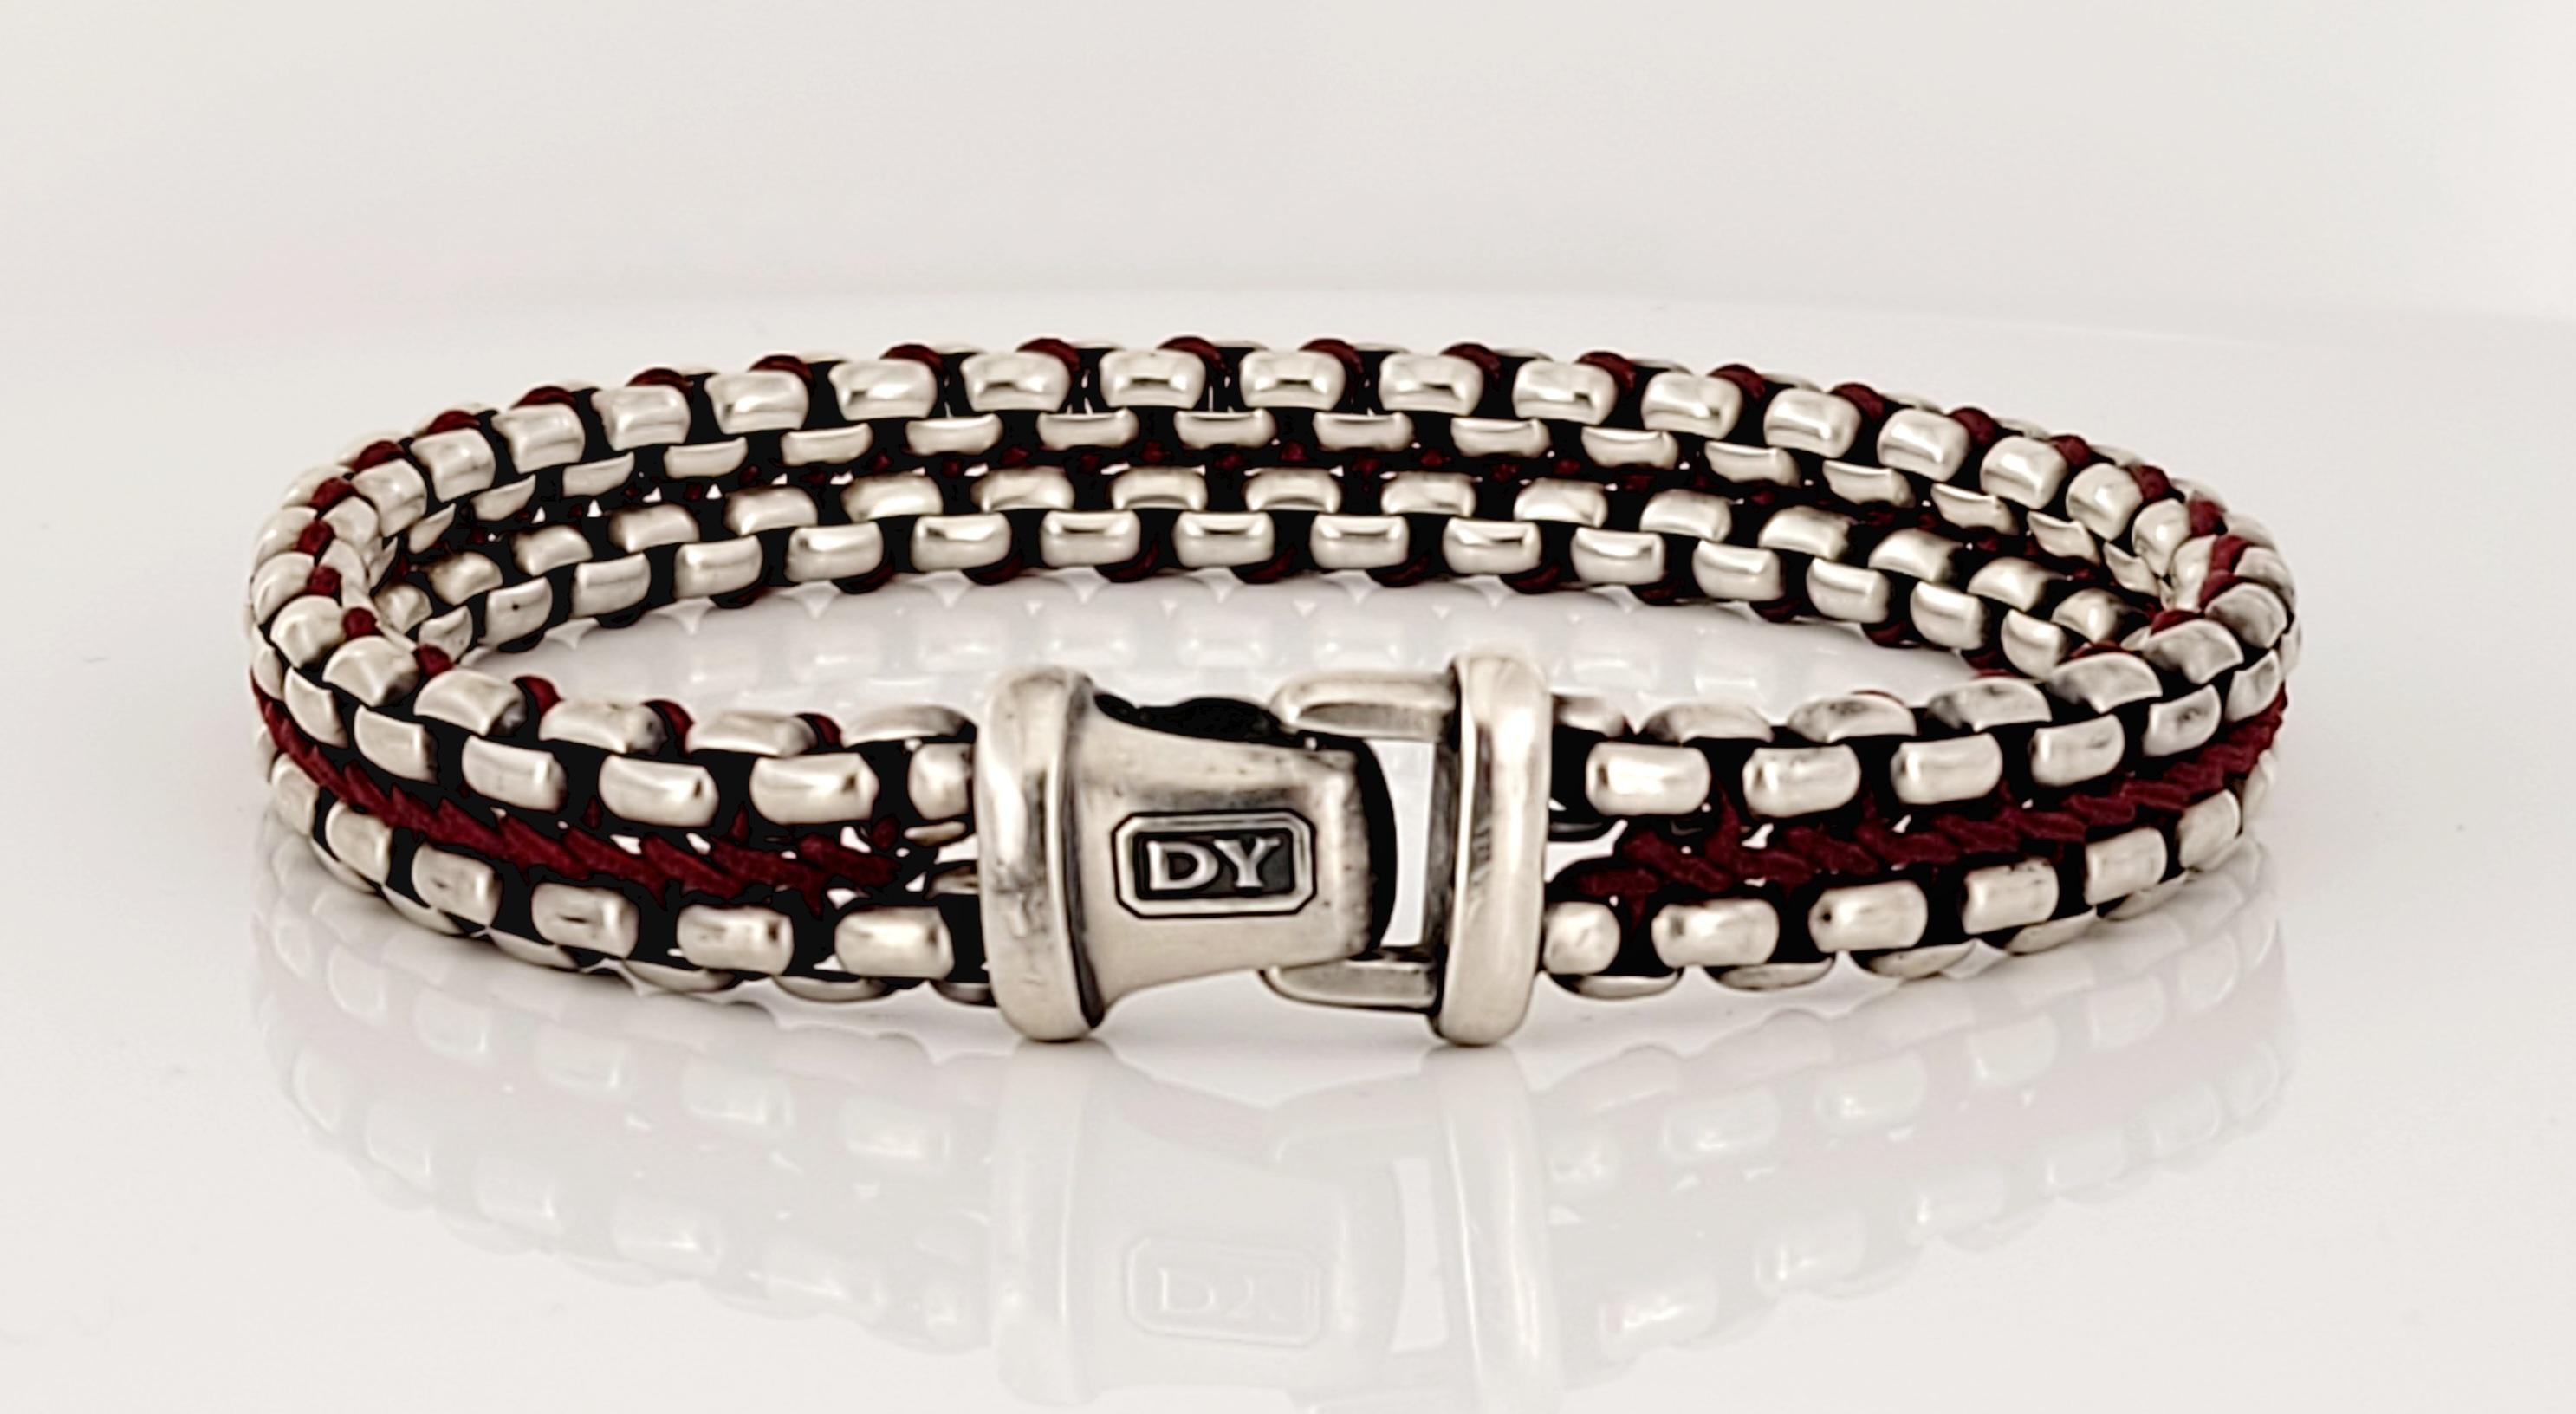 David Yurman Woven Box chain Bracelet
Red Nylon 
Material Sterling Silver
Metal Purity 925
Bracelet 10mm
Bracelet 8.5'' long
Bracelet Push clasp 
Gender Men 
Weight 43.1
Condition New, never worn 
Retail Price $695
Comes with David Yurman pouch